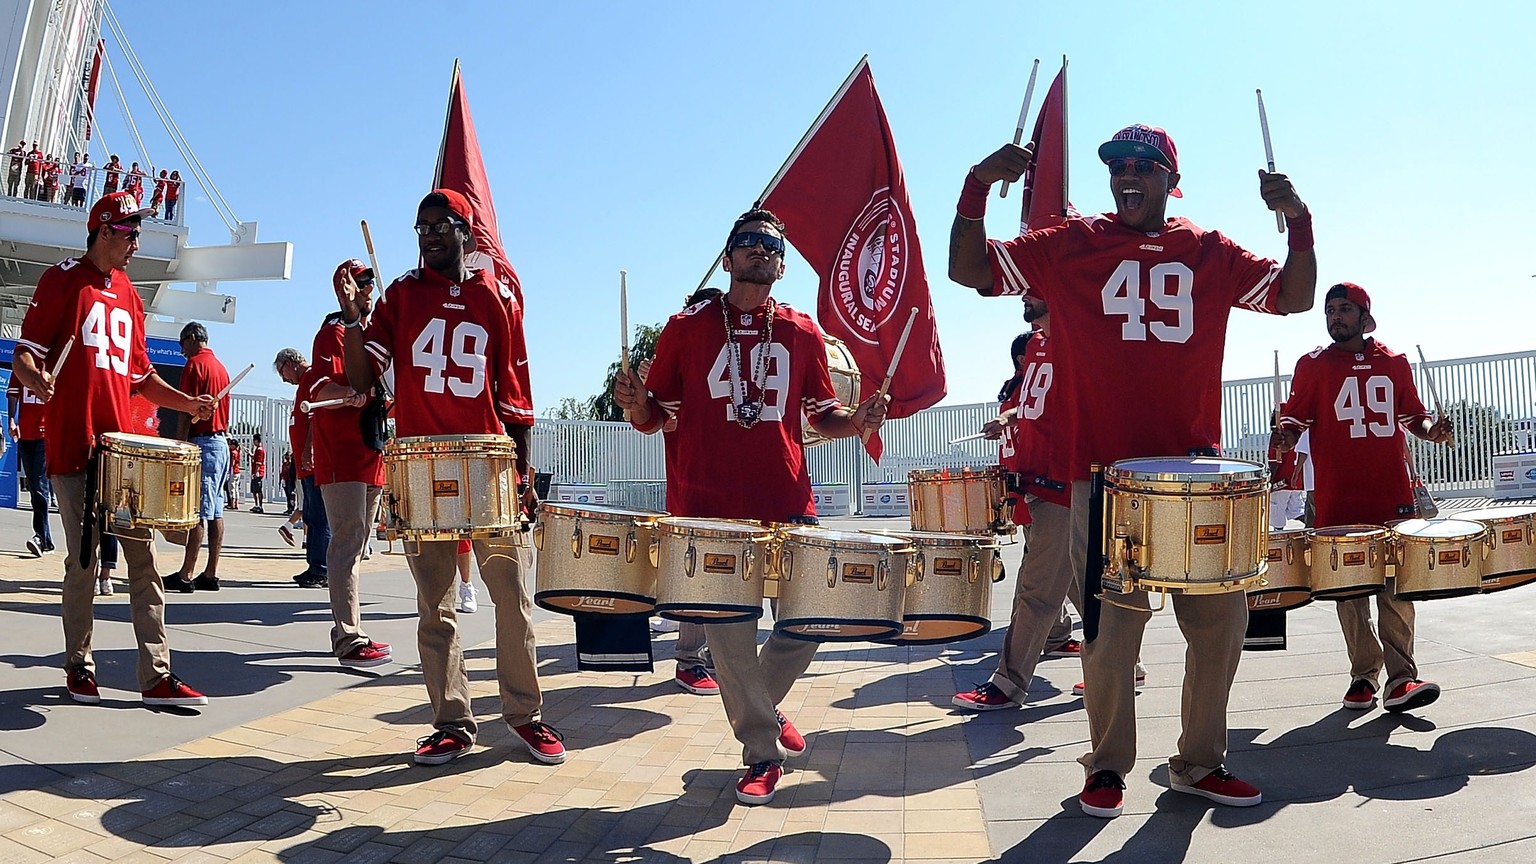 SANTA CLARA, CA - SEPTEMBER 14: The 49'ers fan patrol gets the crowd going before the game between the San Francisco 49ers and the Chicago Bears at Levi's Stadium on September 14, 2014 in Santa Clara, ...